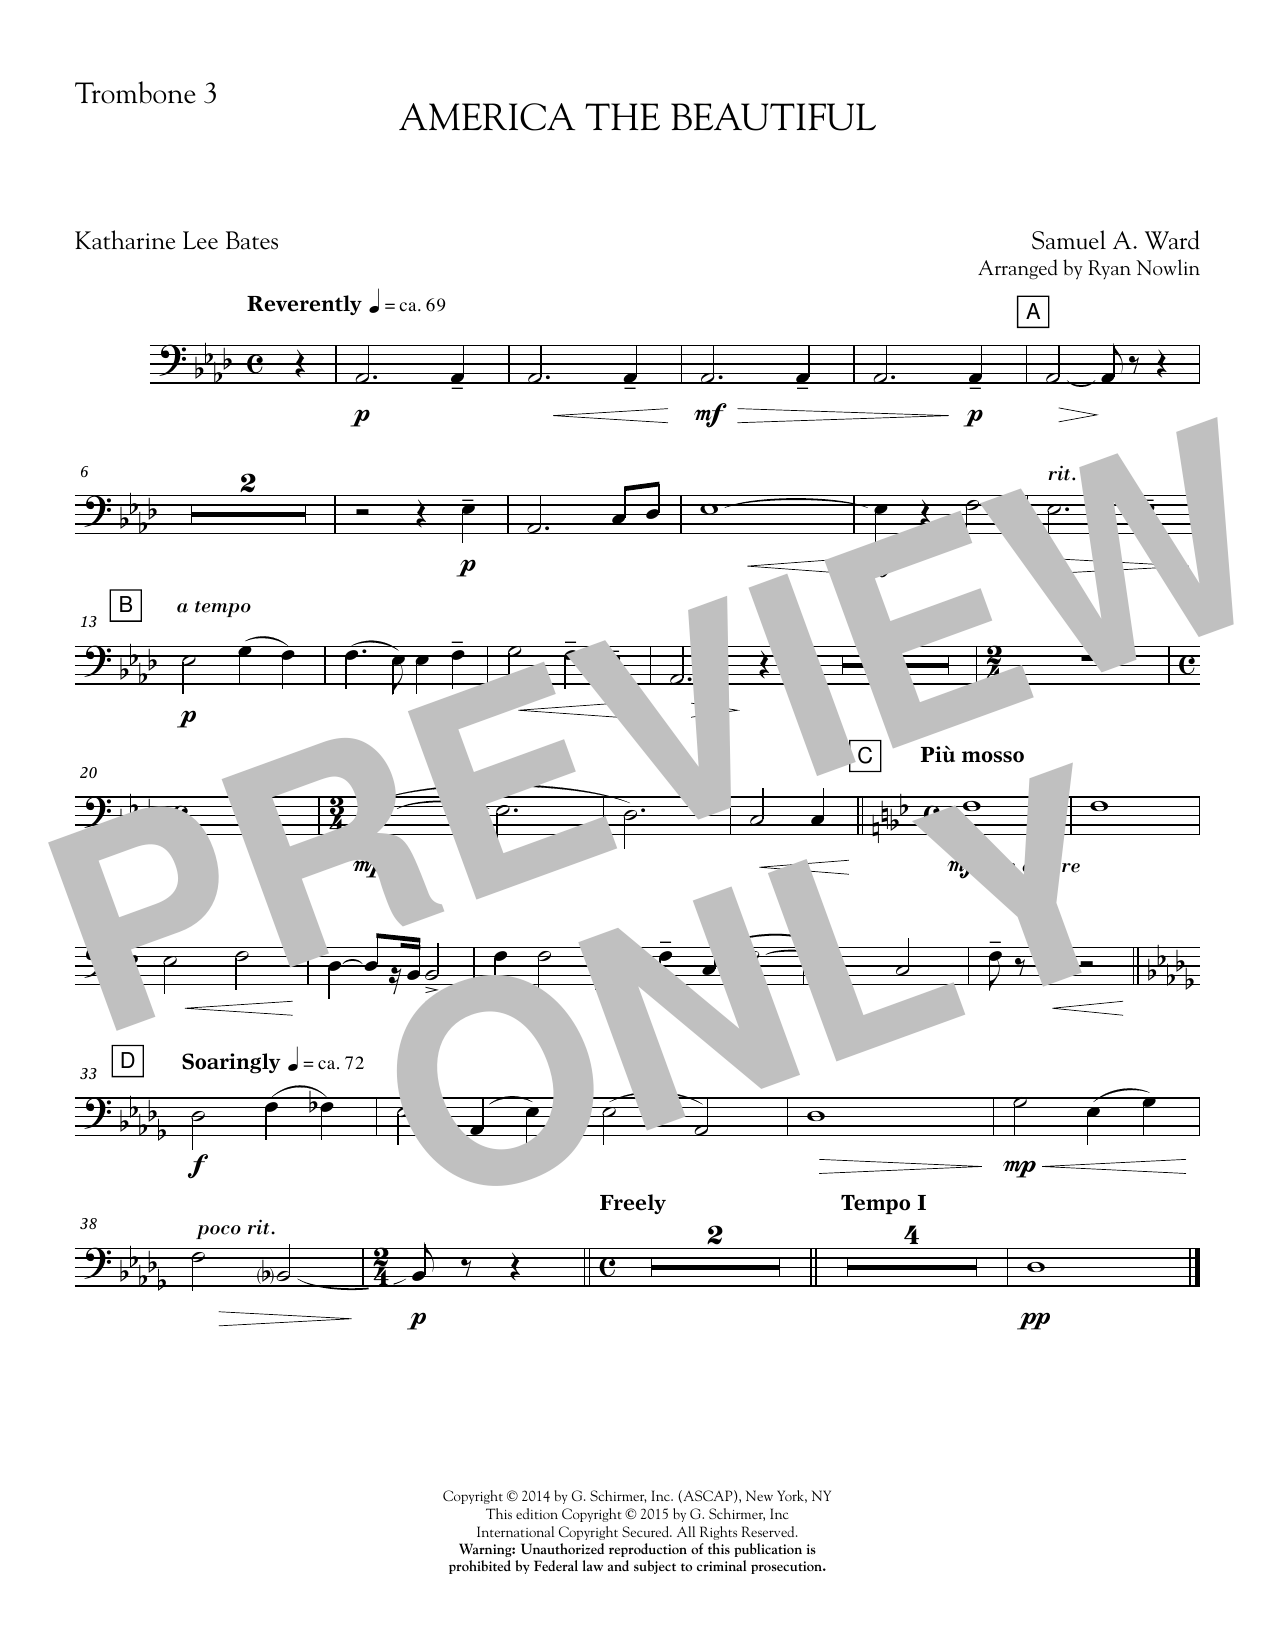 Ryan Nowlin America, the Beautiful - Trombone 3 sheet music notes and chords. Download Printable PDF.